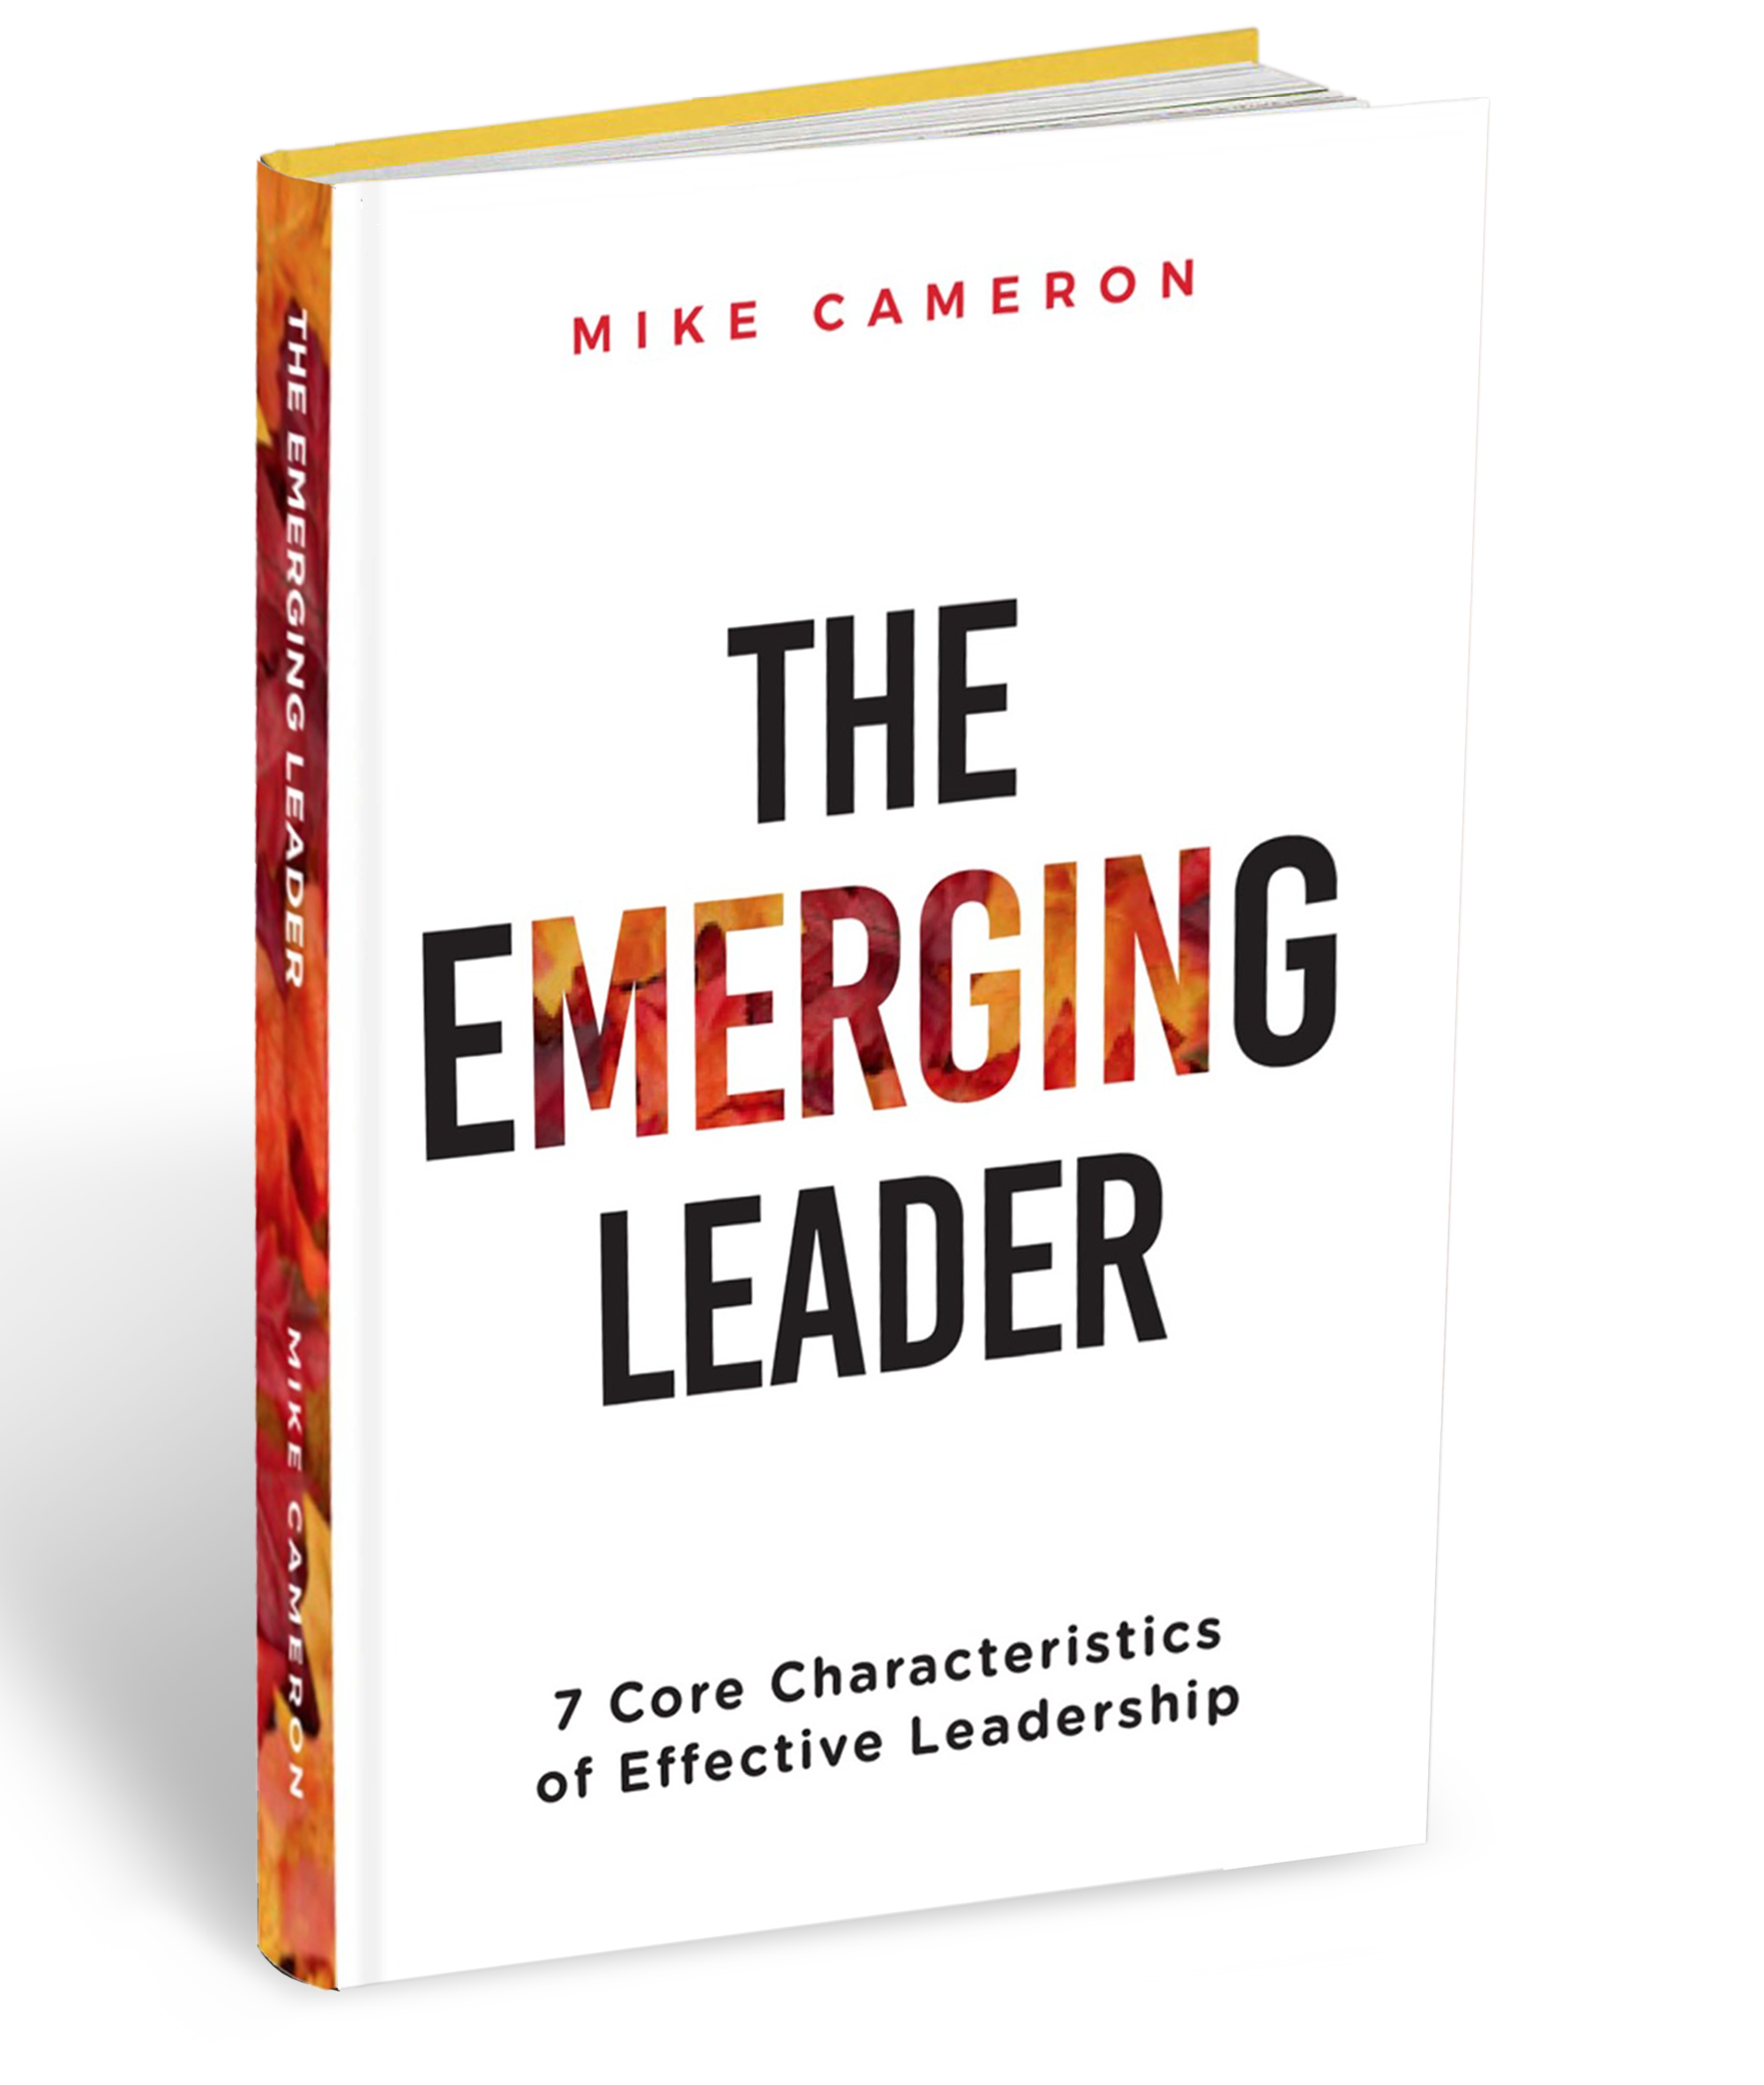 The Emerging Leader book by Mike Cameron